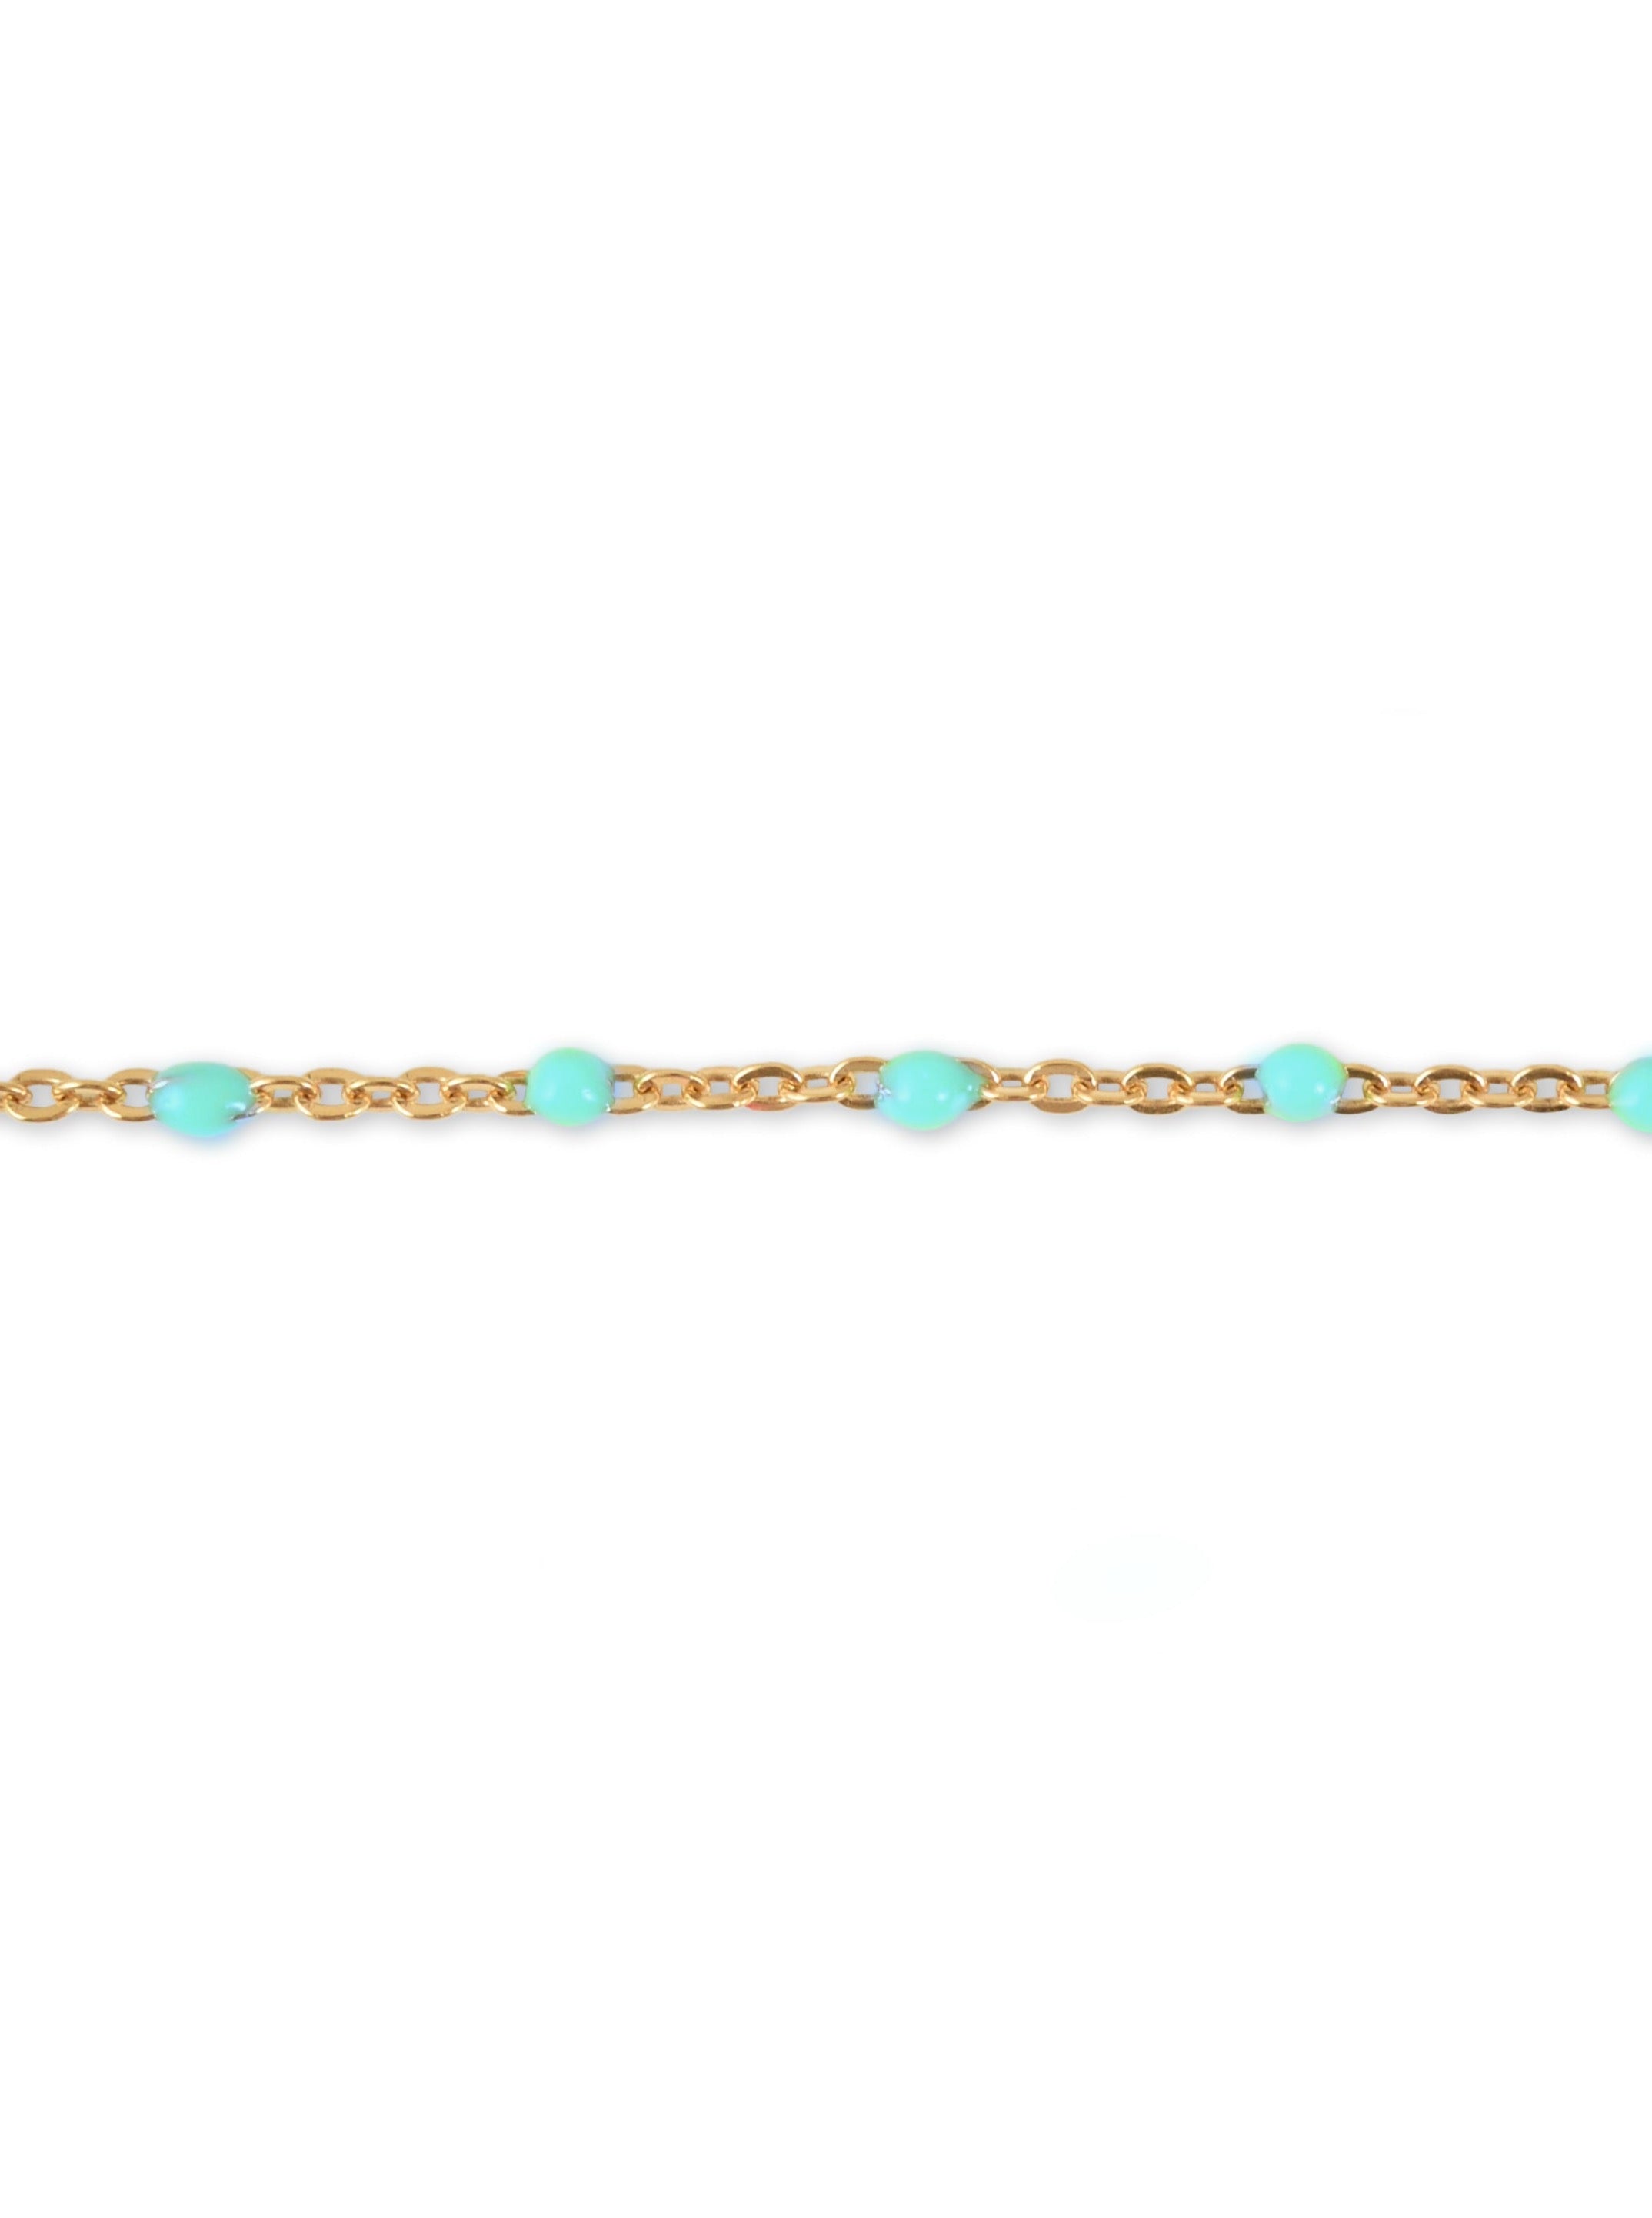 Poppy Chain in Blue in Gold Filled